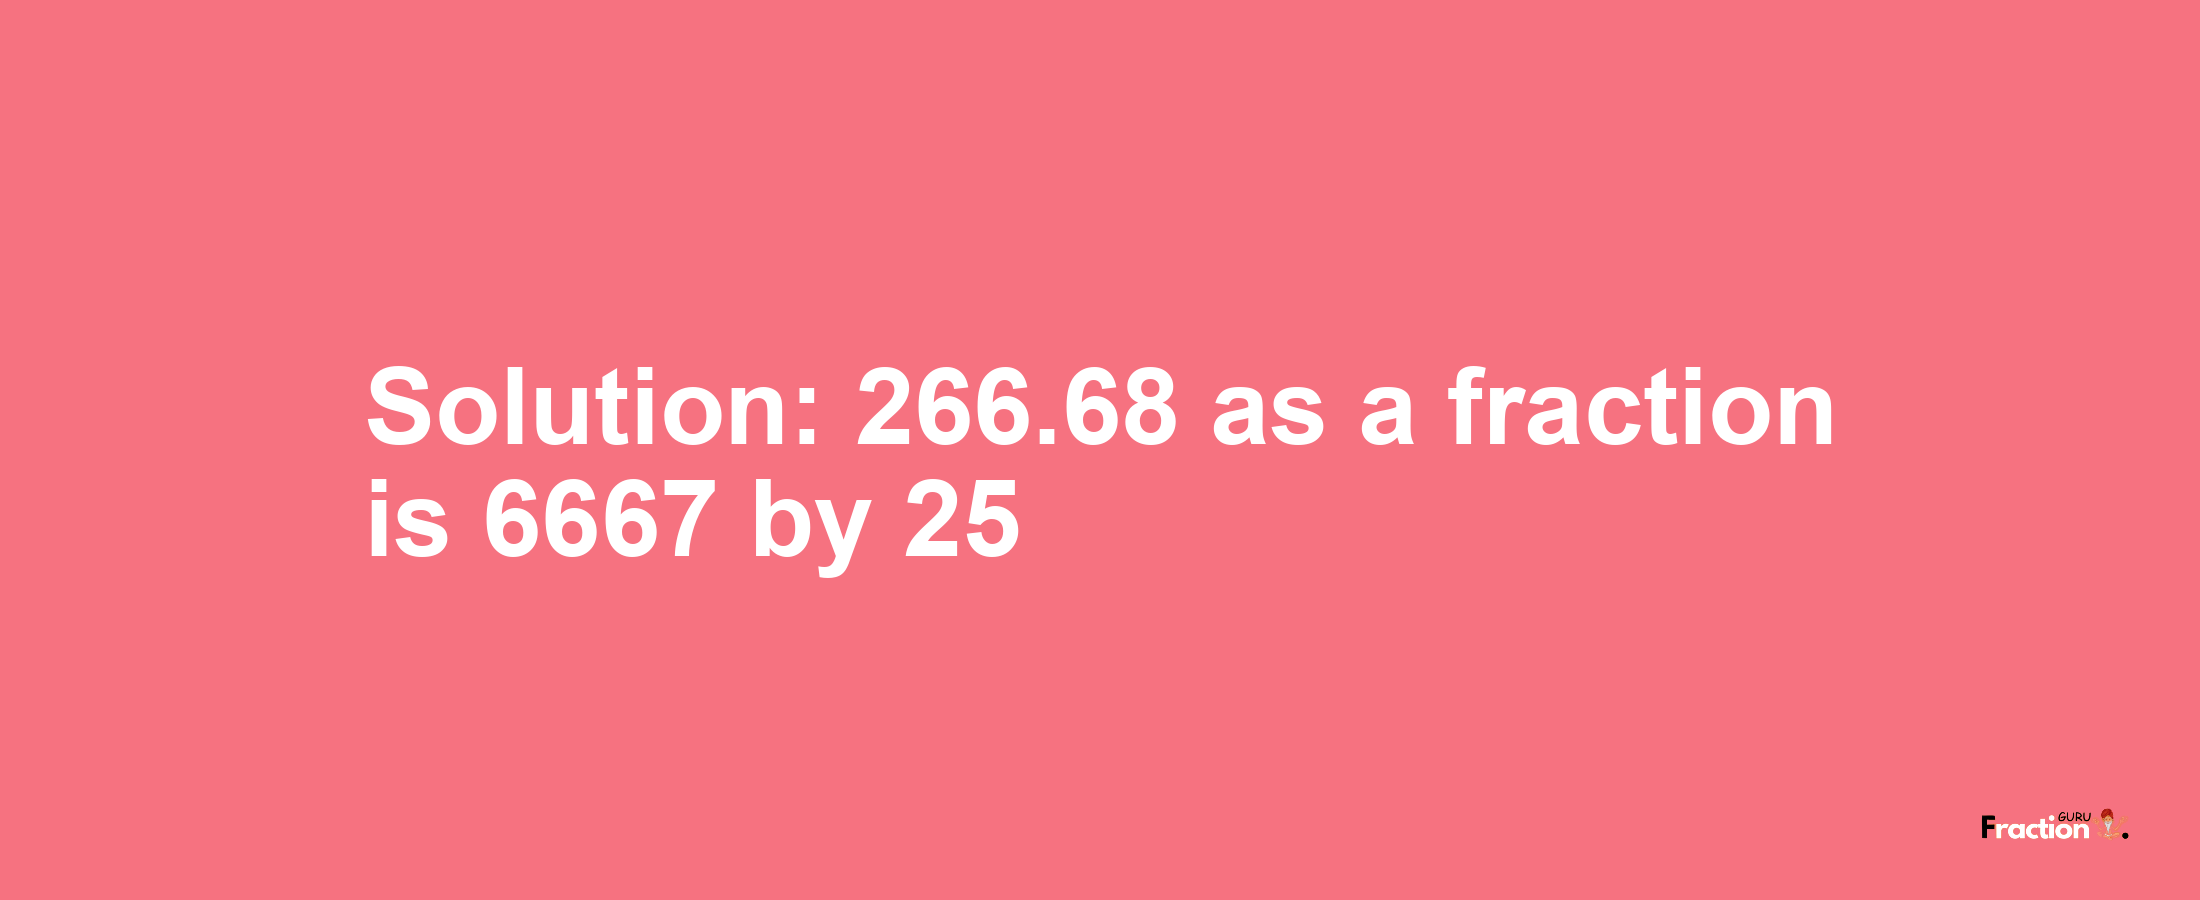 Solution:266.68 as a fraction is 6667/25